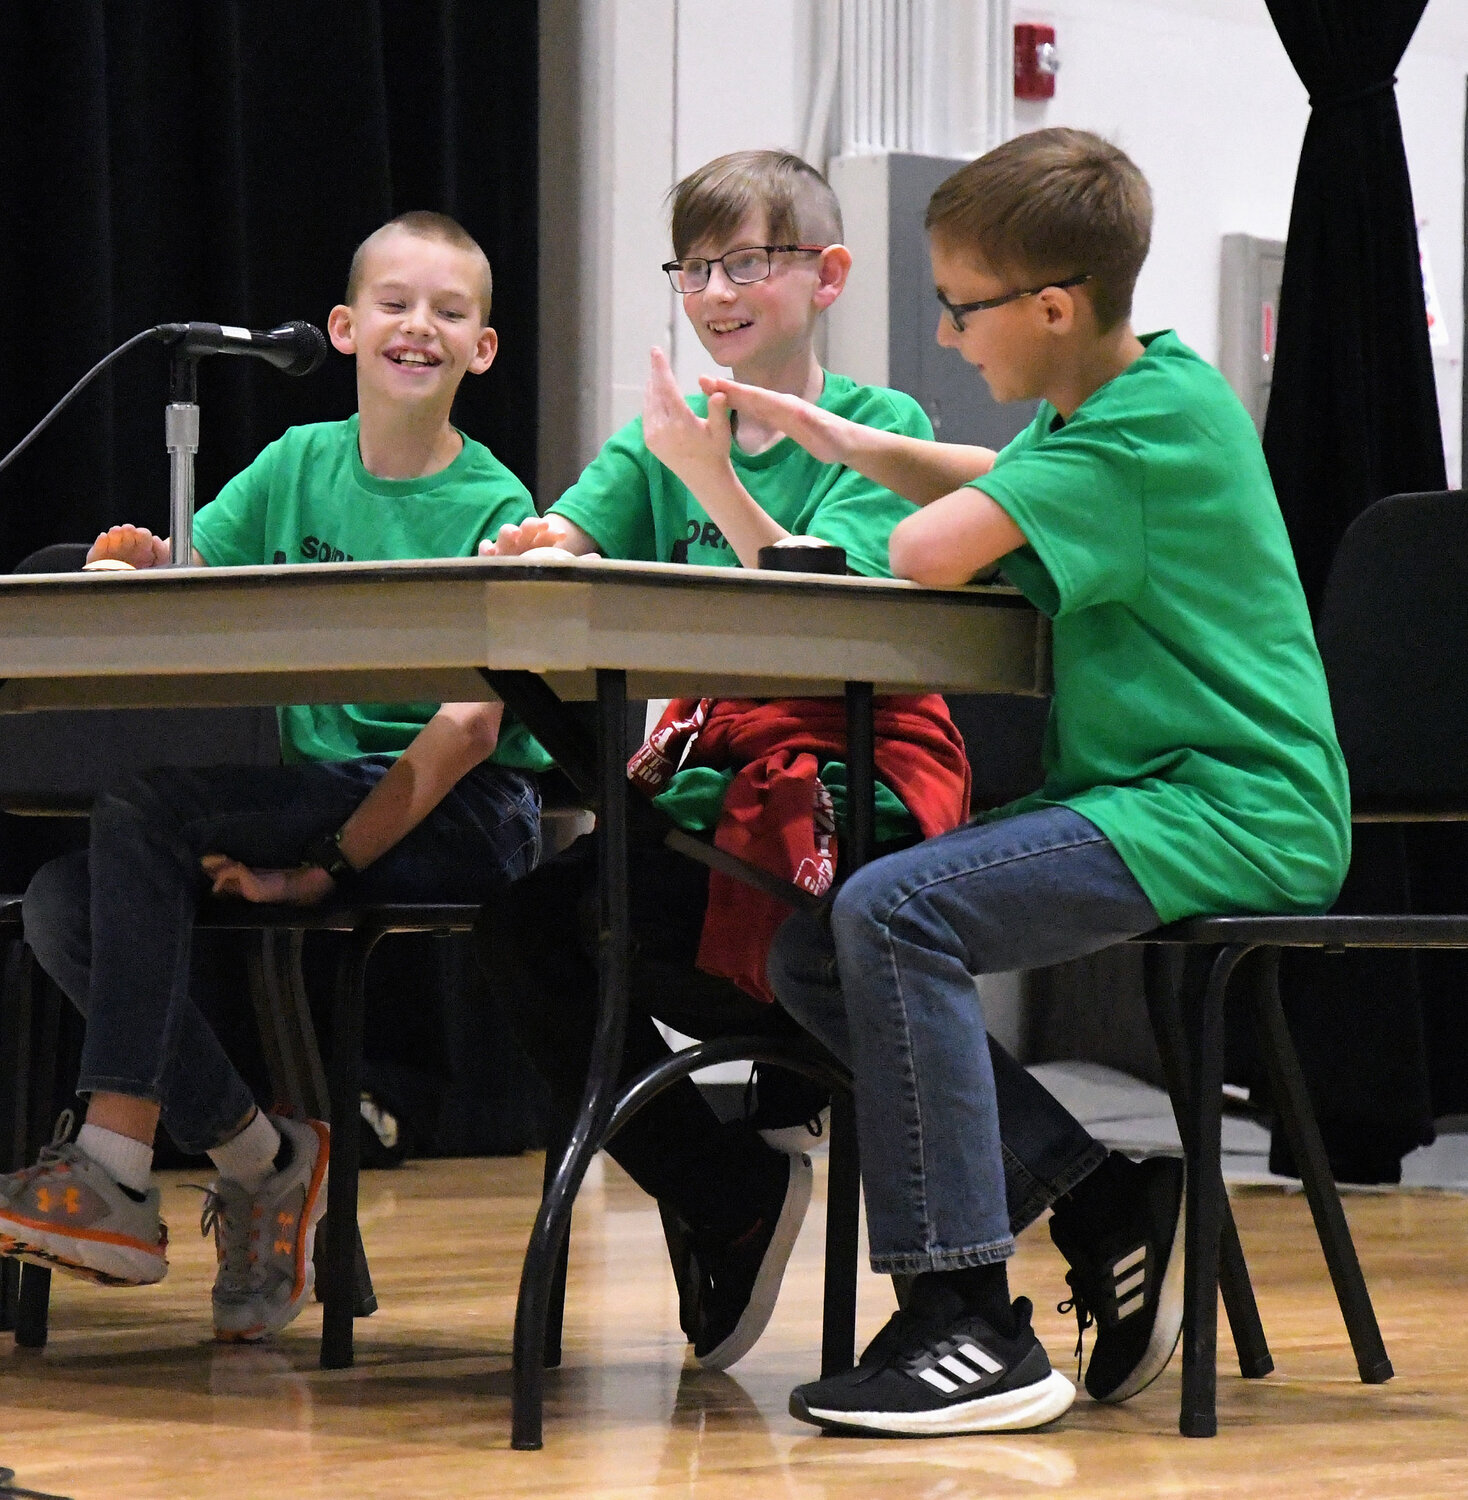 Sixth-grade students Dieter Lester, Liam Griffiths and Jace Bitton were Reading Rumble winners this year.